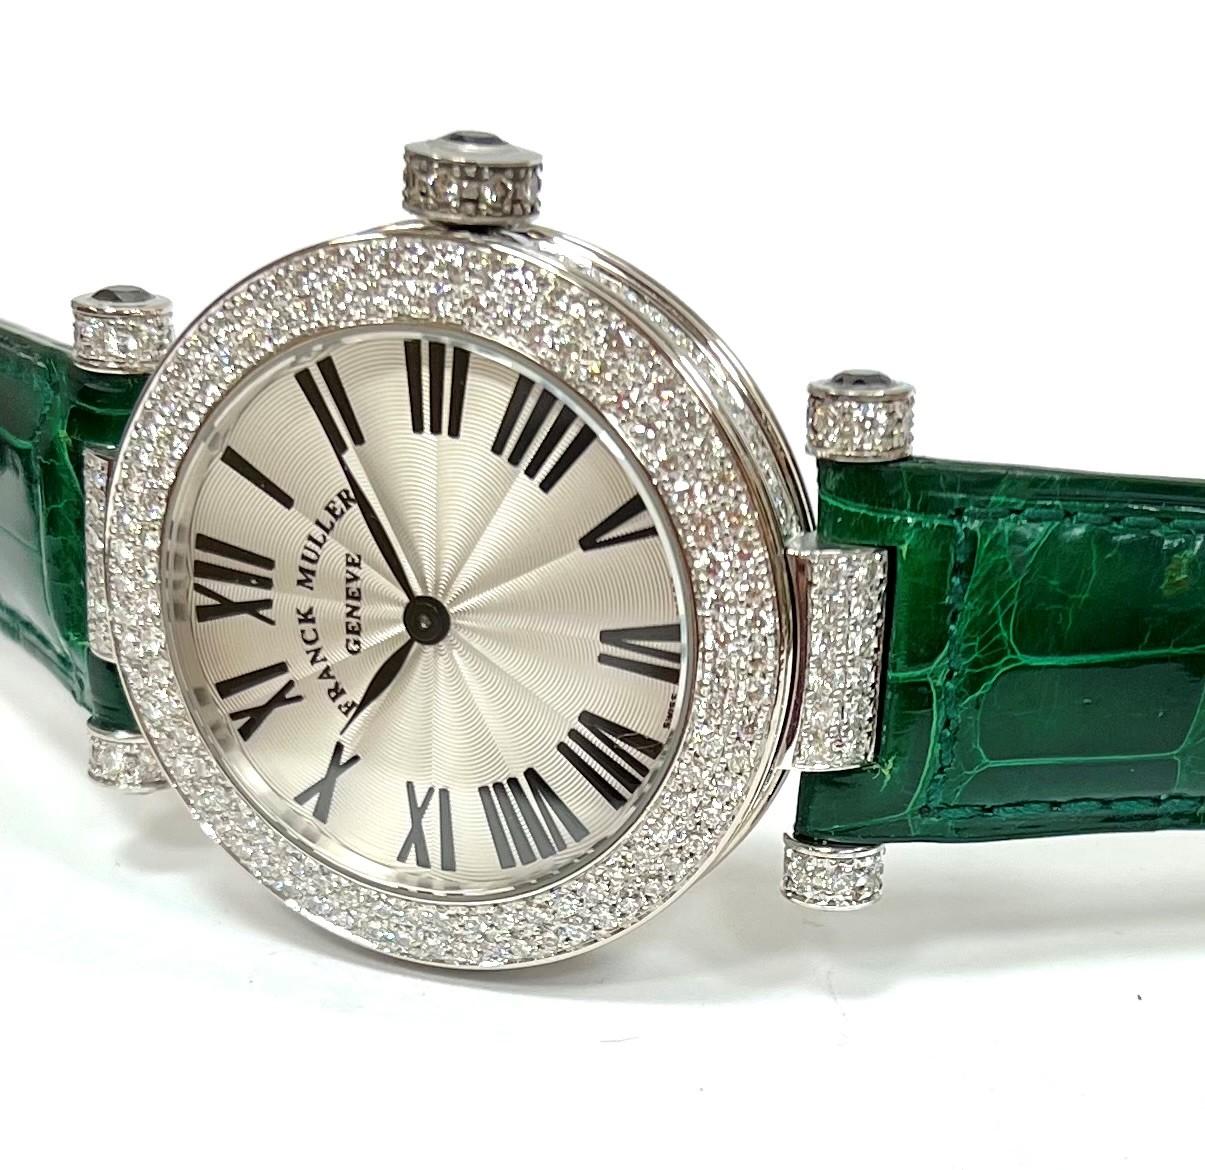 Franck Muller White Gold and Diamonds Ronde Watch   39mm
Silver Dial
Diamond Bezel   
Green Alligator Strap
Comes With Box and Papers
Retail $49,800.00